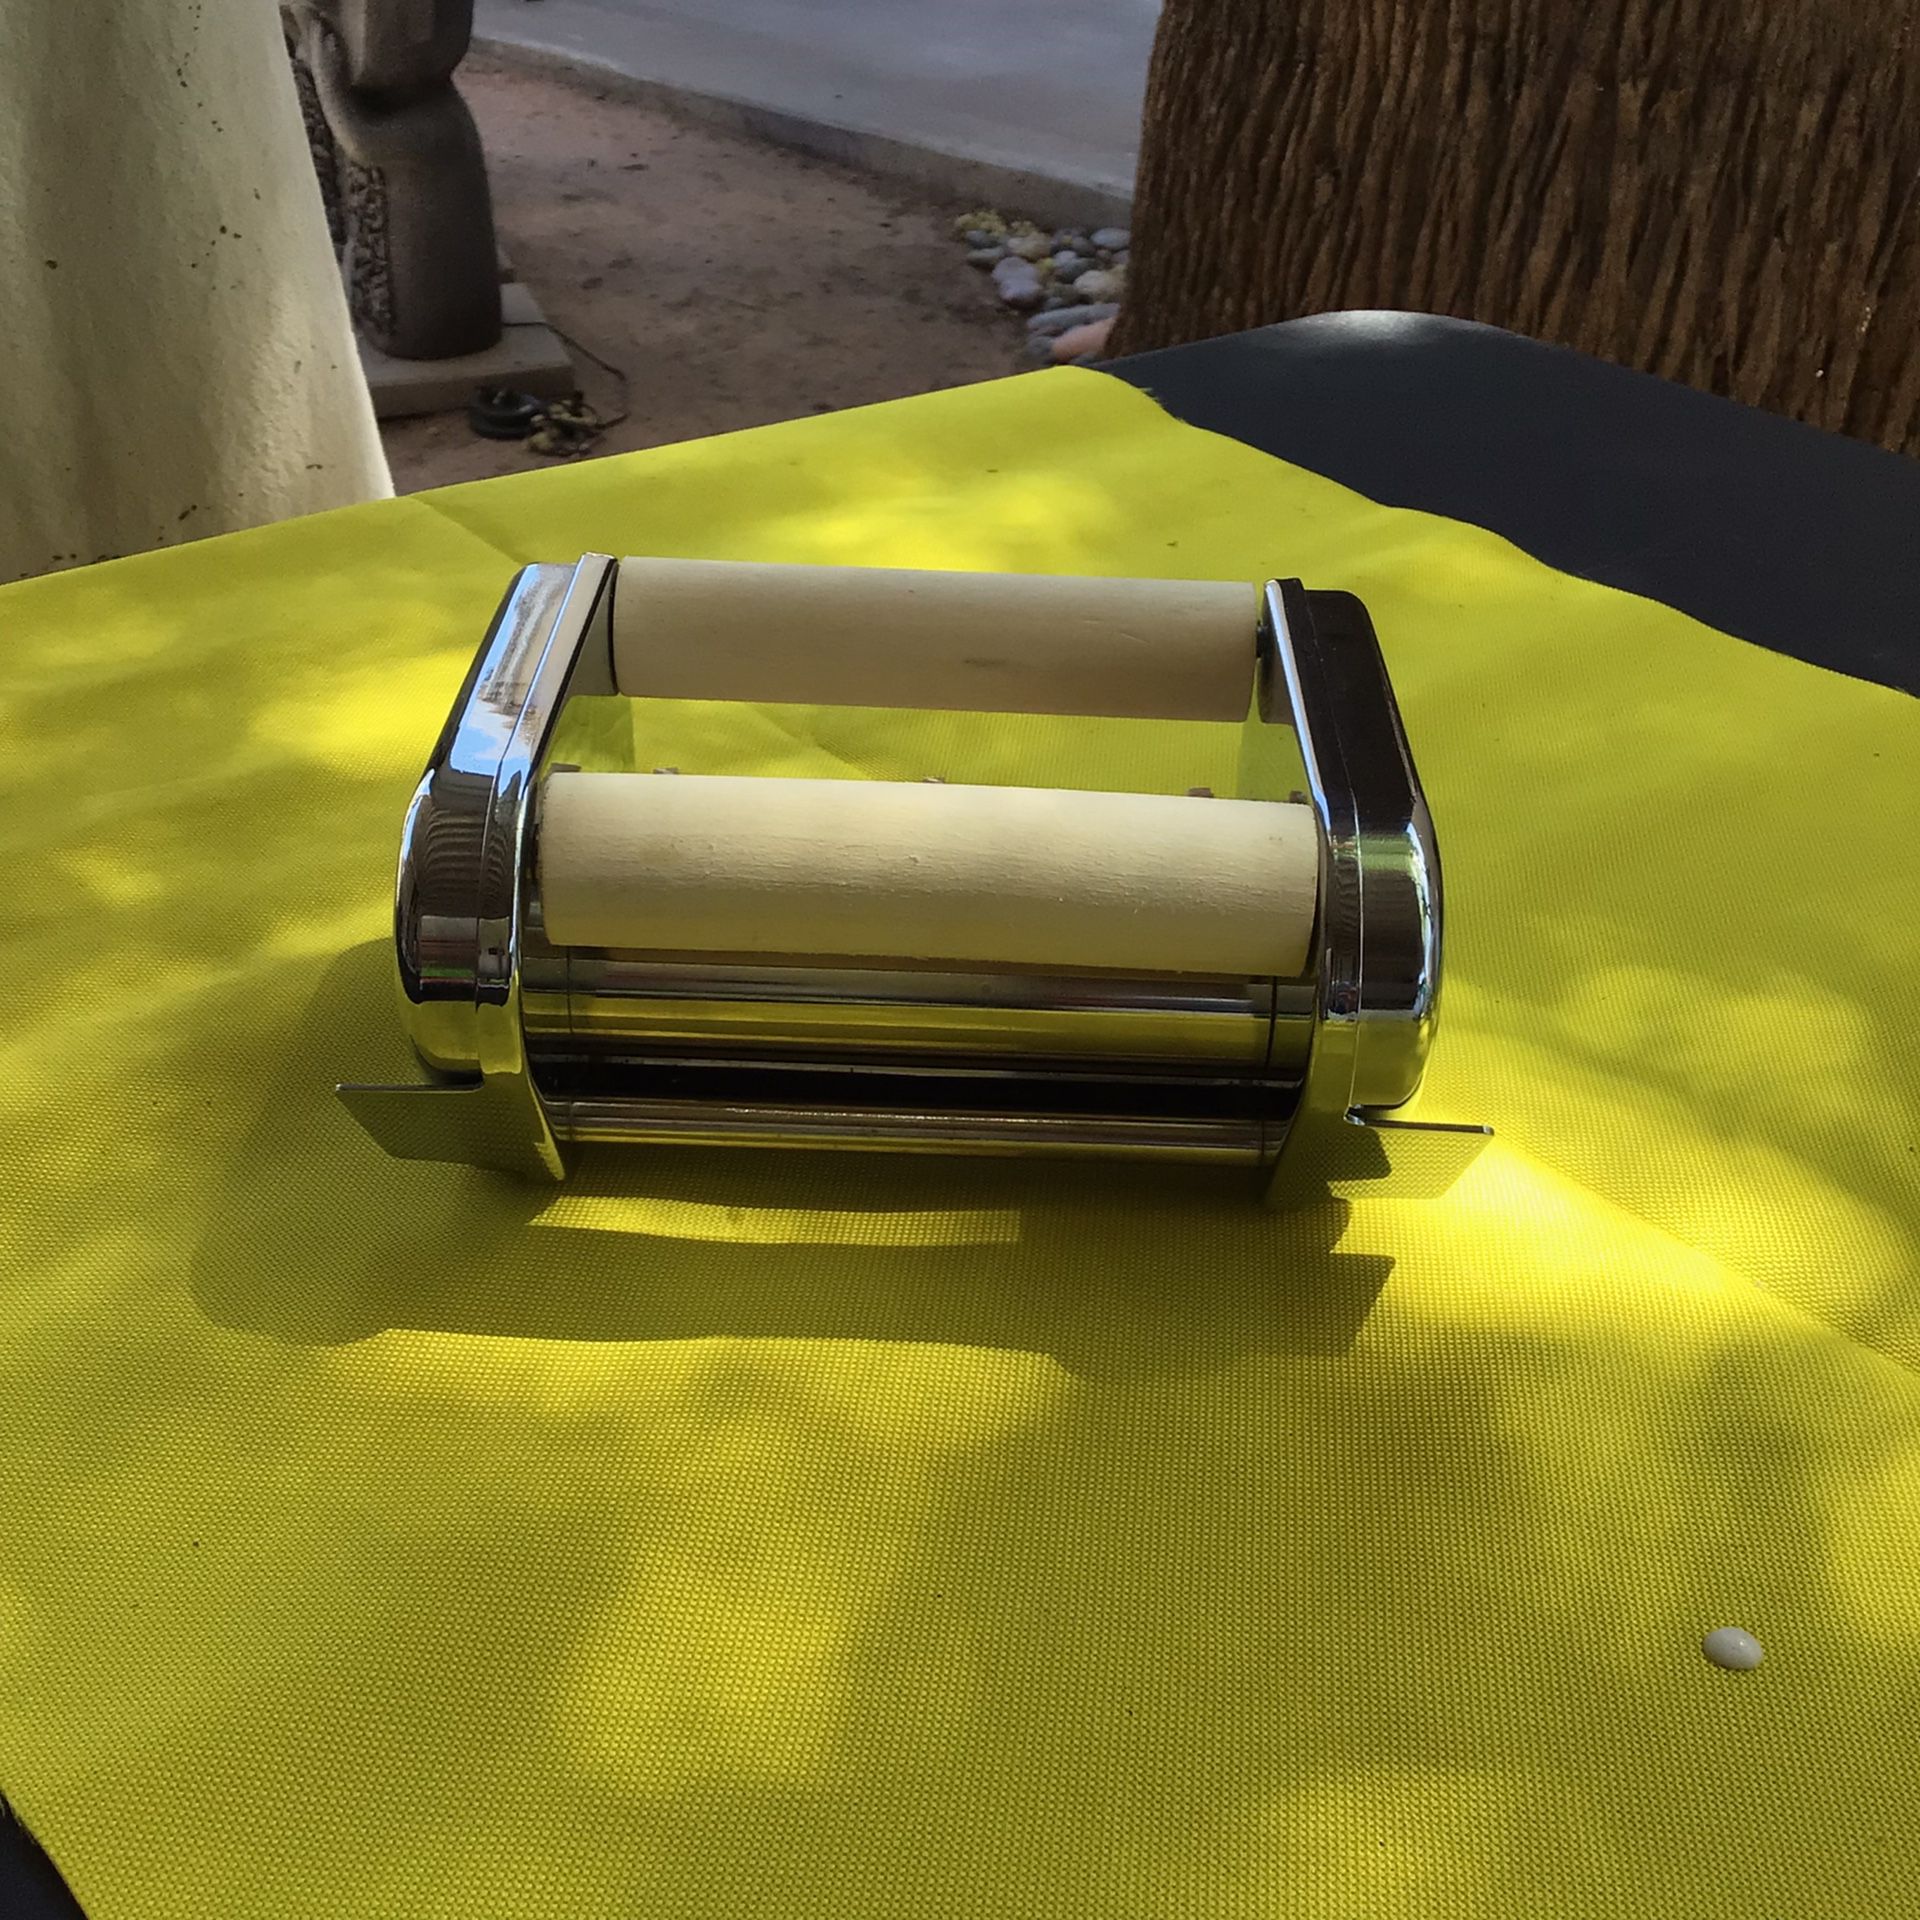 Cavatelli Pasta Maker Clamps To Counter for Sale in Mesa, AZ - OfferUp